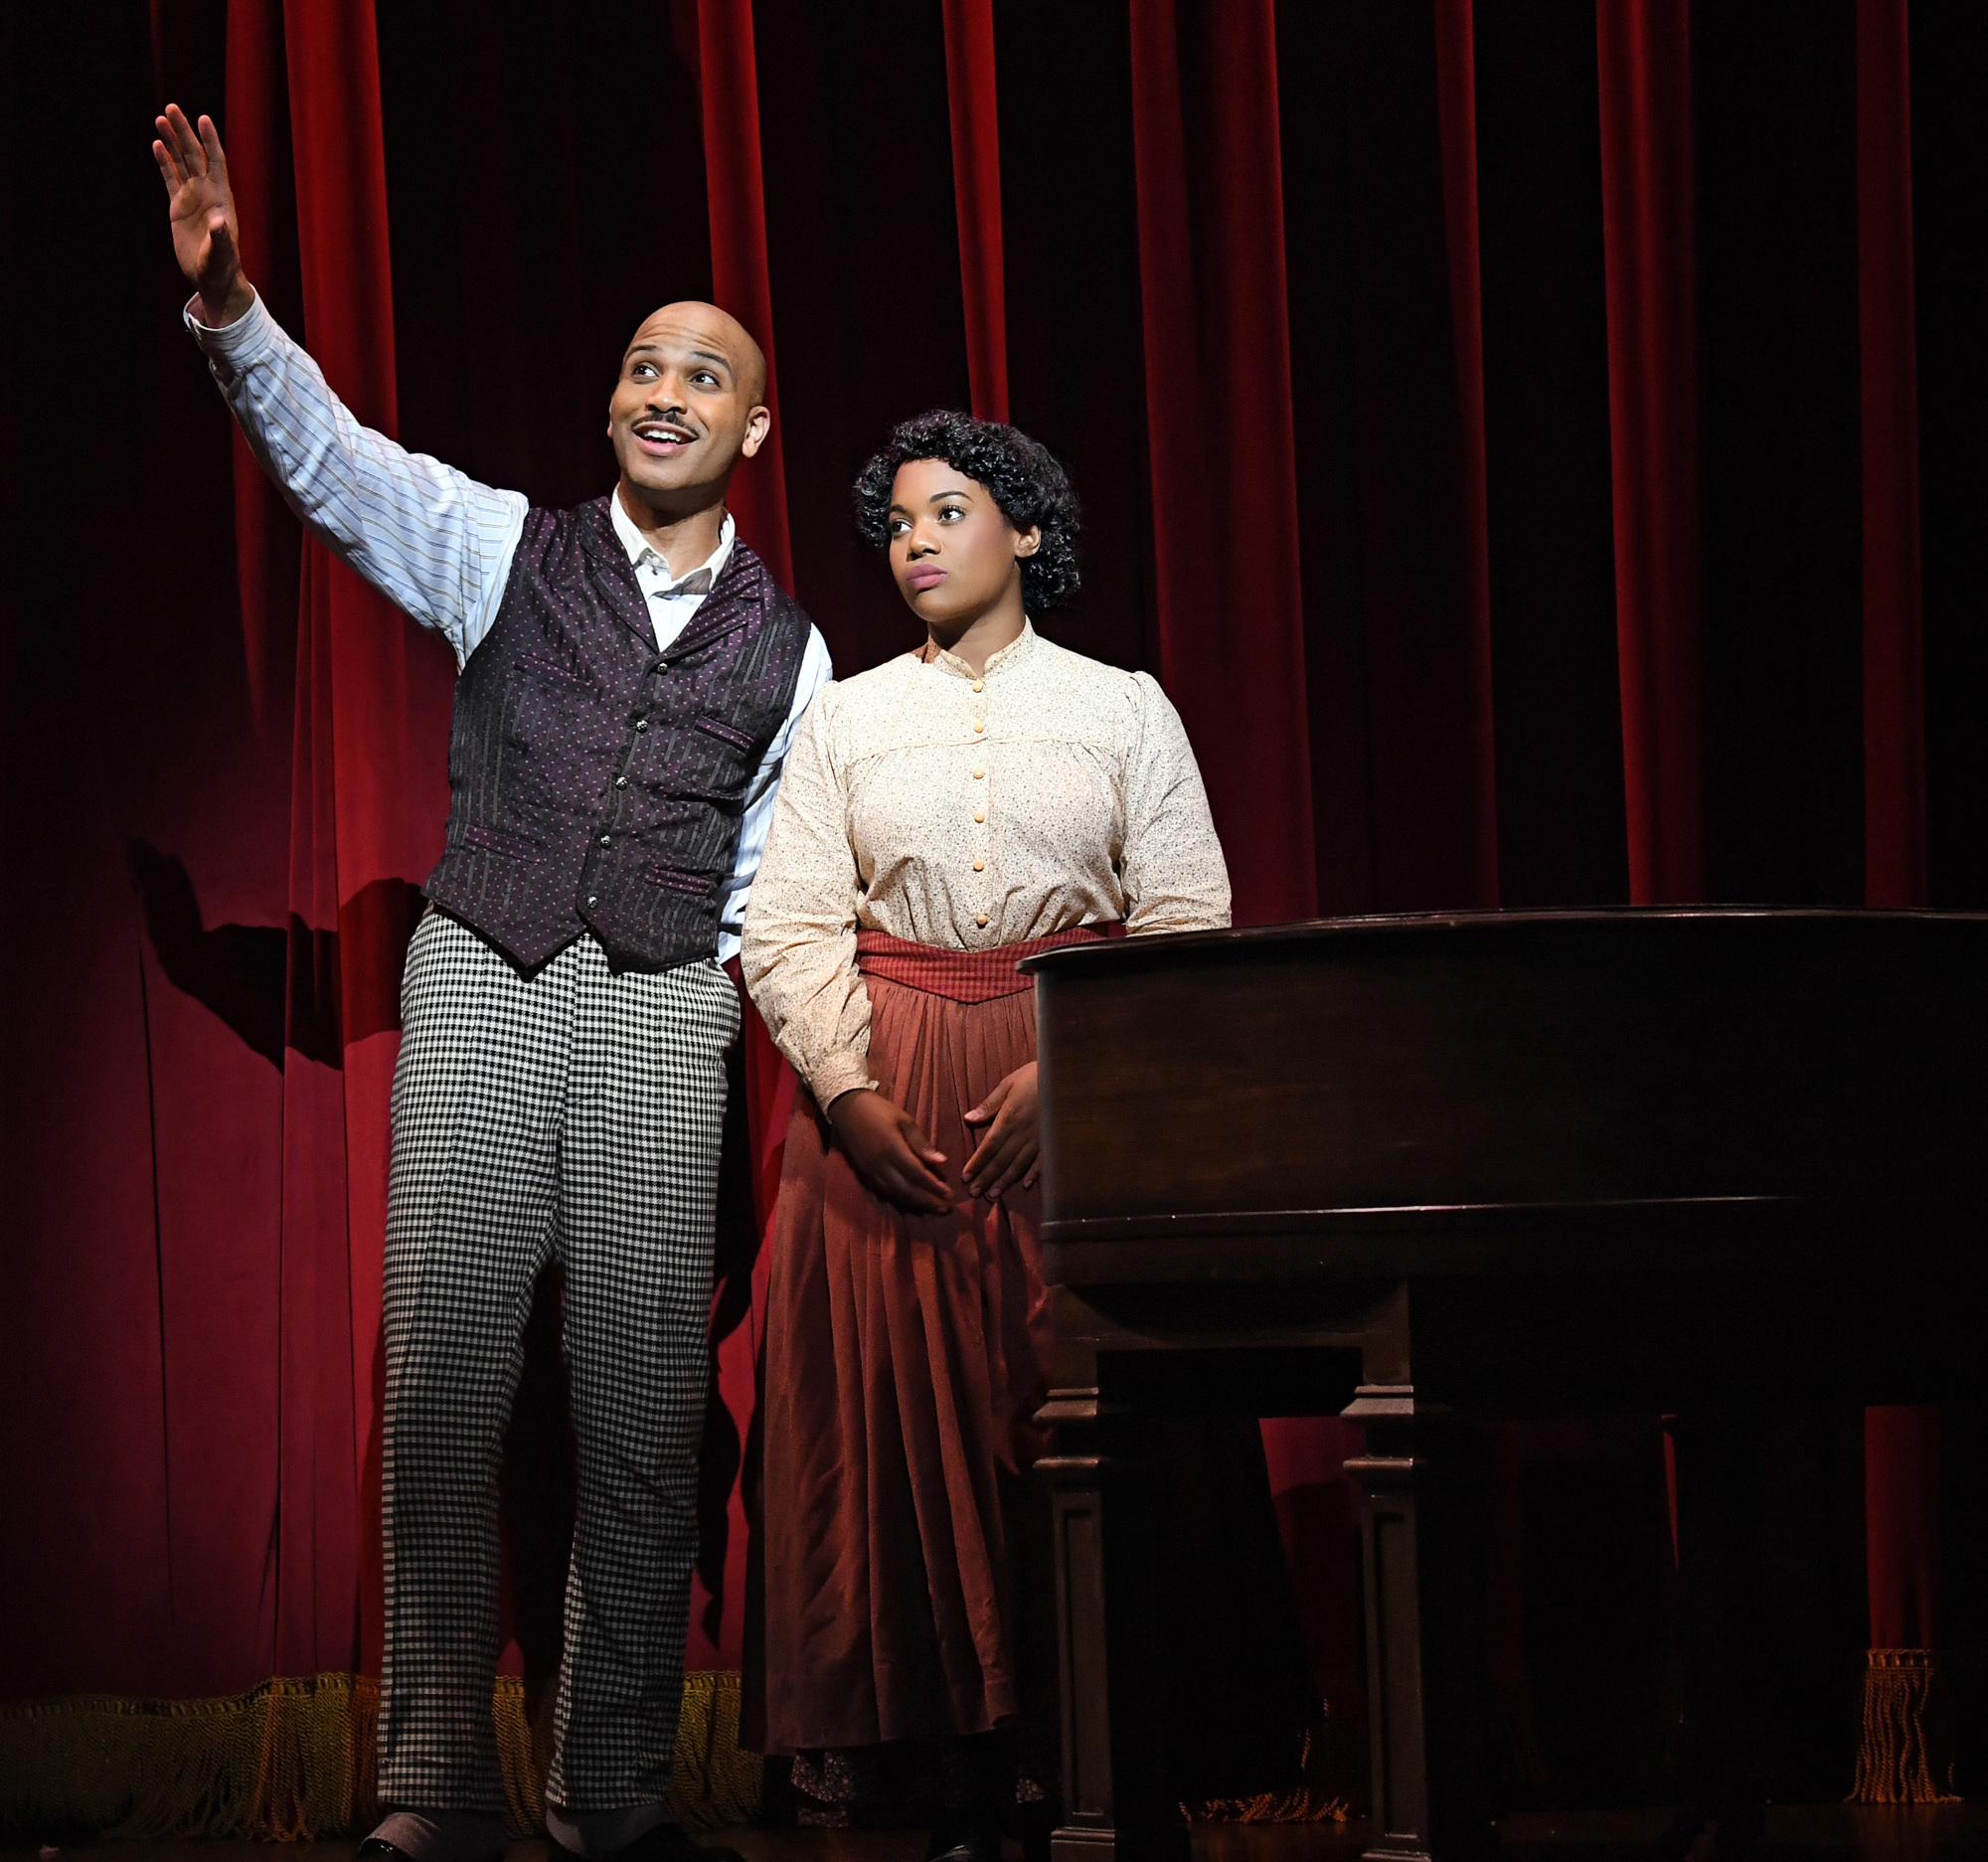 Jared Joseph and Danyel Fulton play new parents Sarah and Coalhouse Walker Jr. in Asolo Repertory Theatre’s intimate cast of “Ragtime.” Photo by Cliff Roles